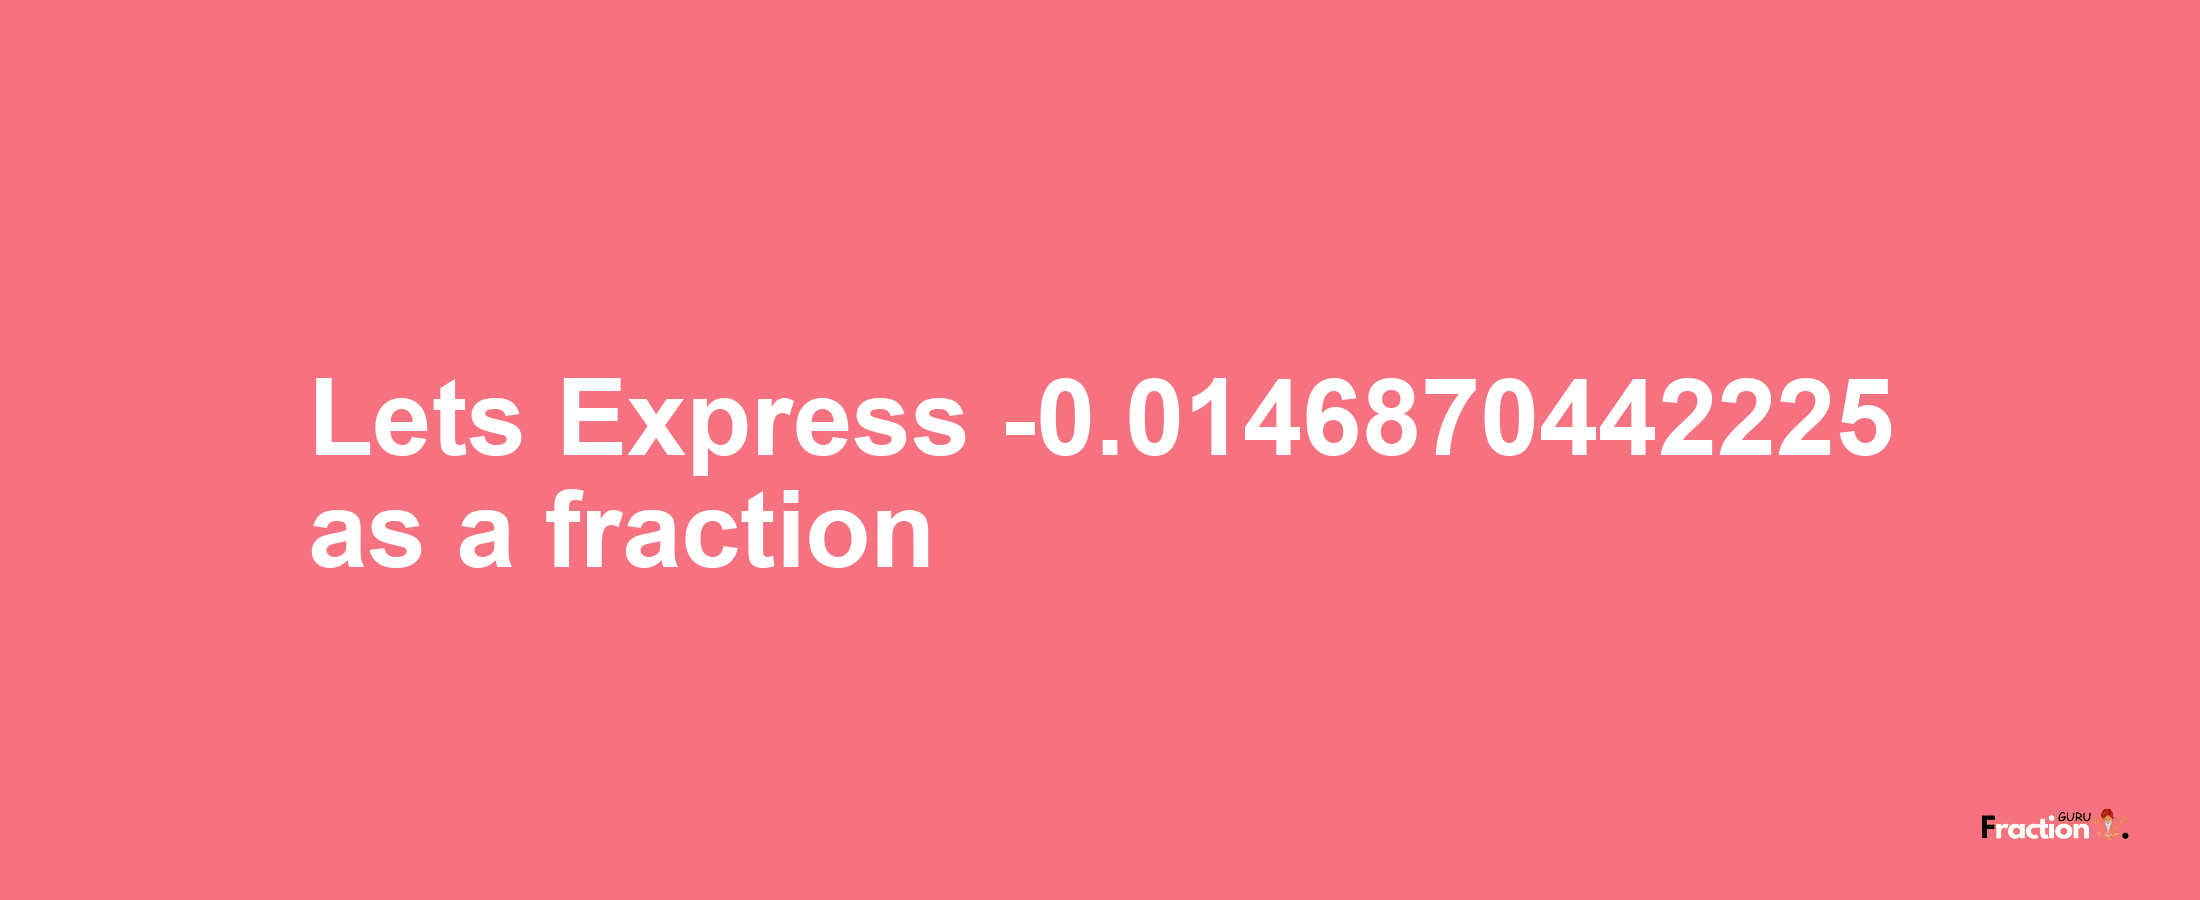 Lets Express -0.0146870442225 as afraction